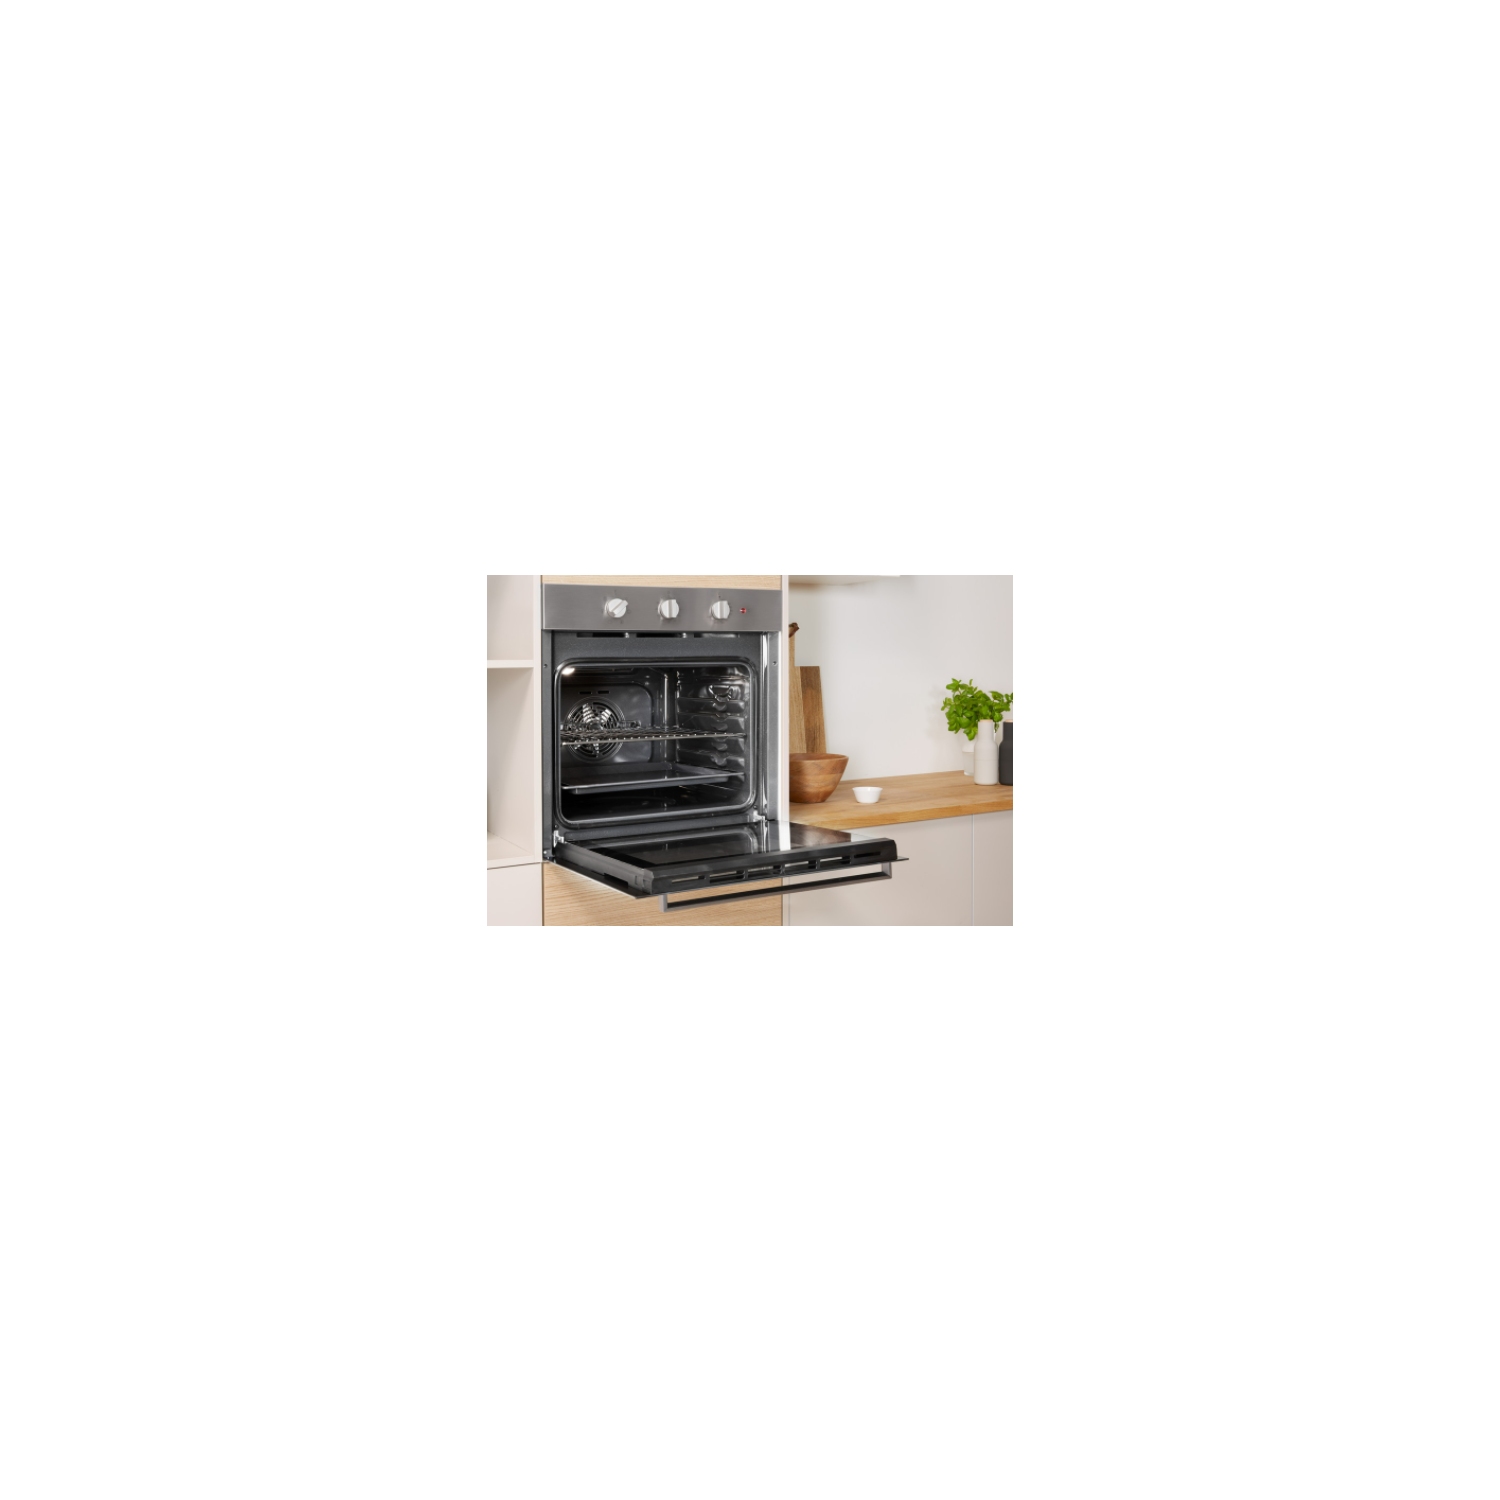 INDESIT IFW6230IXUK 59.5CM BUILT IN ELECTRIC SINGLE OVEN - STAINLESS STEEL - 1